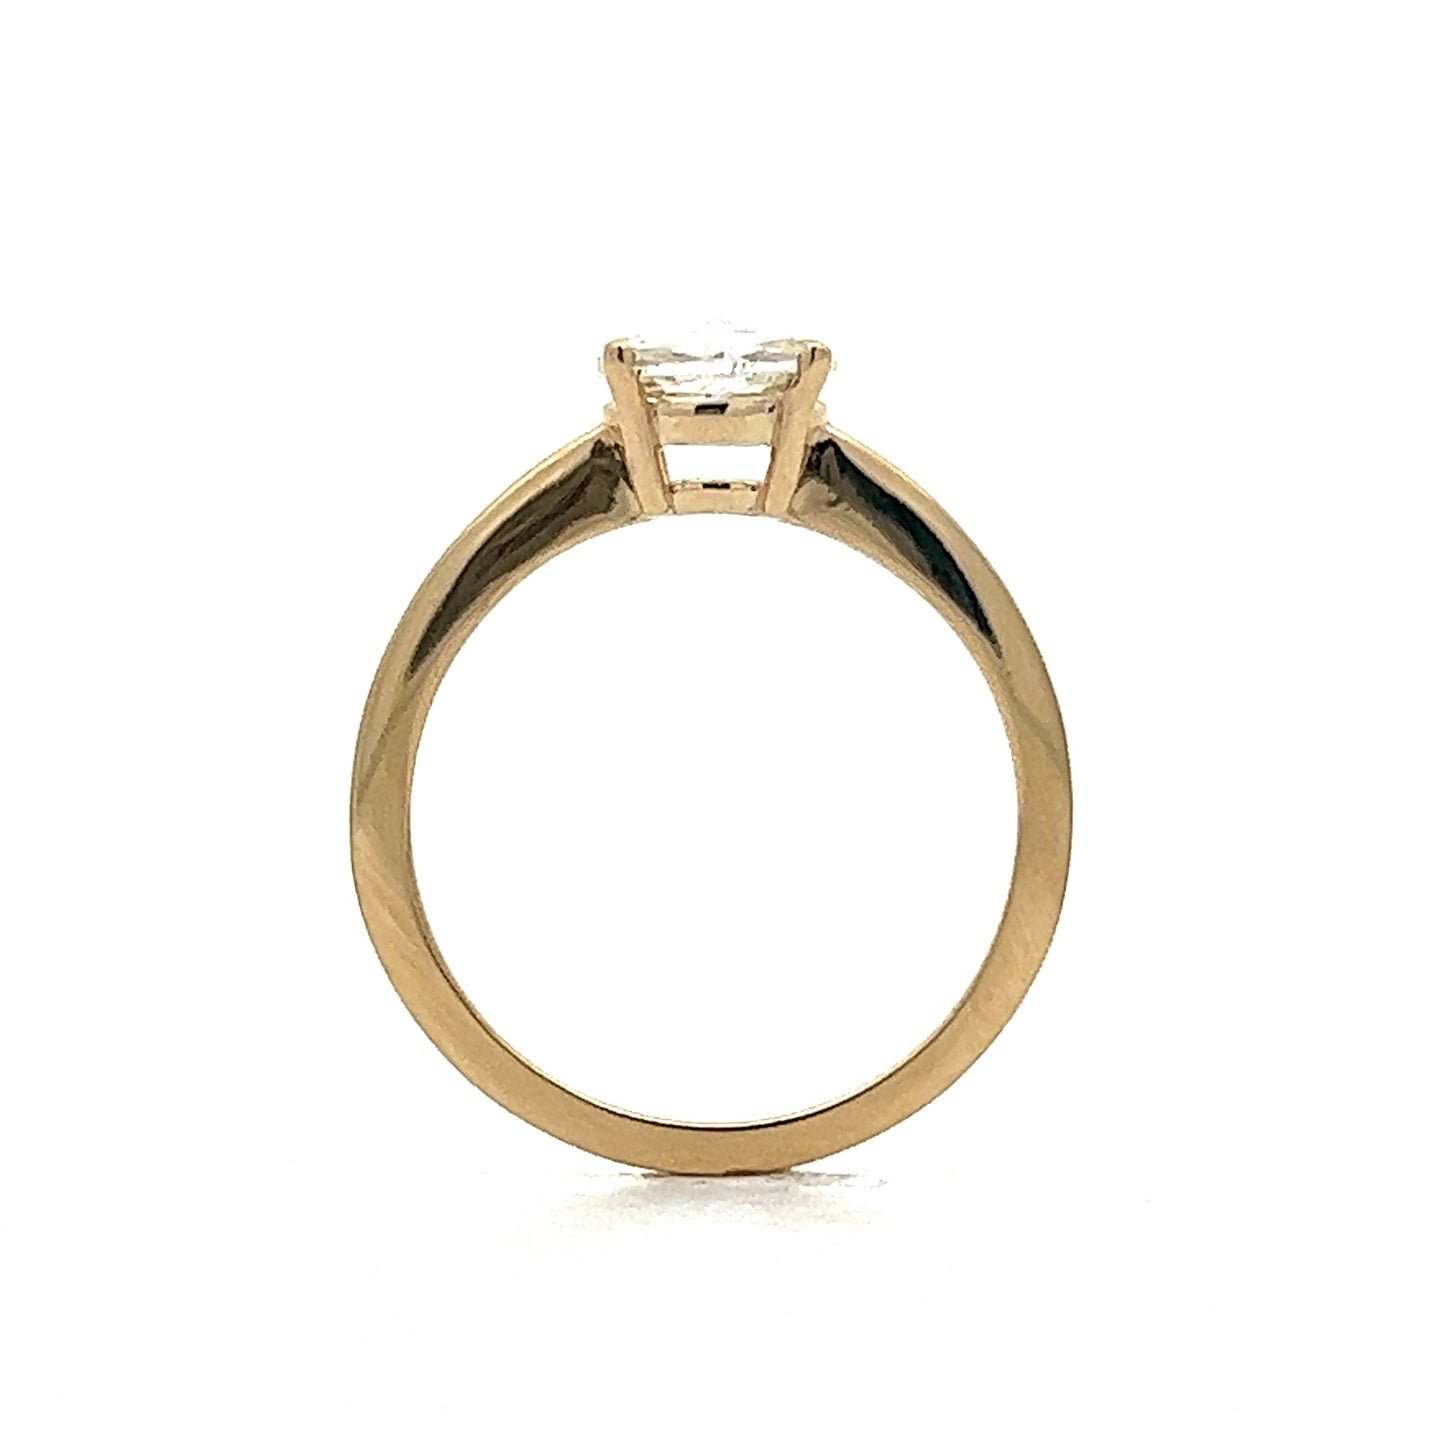 .82 Rose Cut Diamond Solitaire Engagement Ring in Yellow Gold